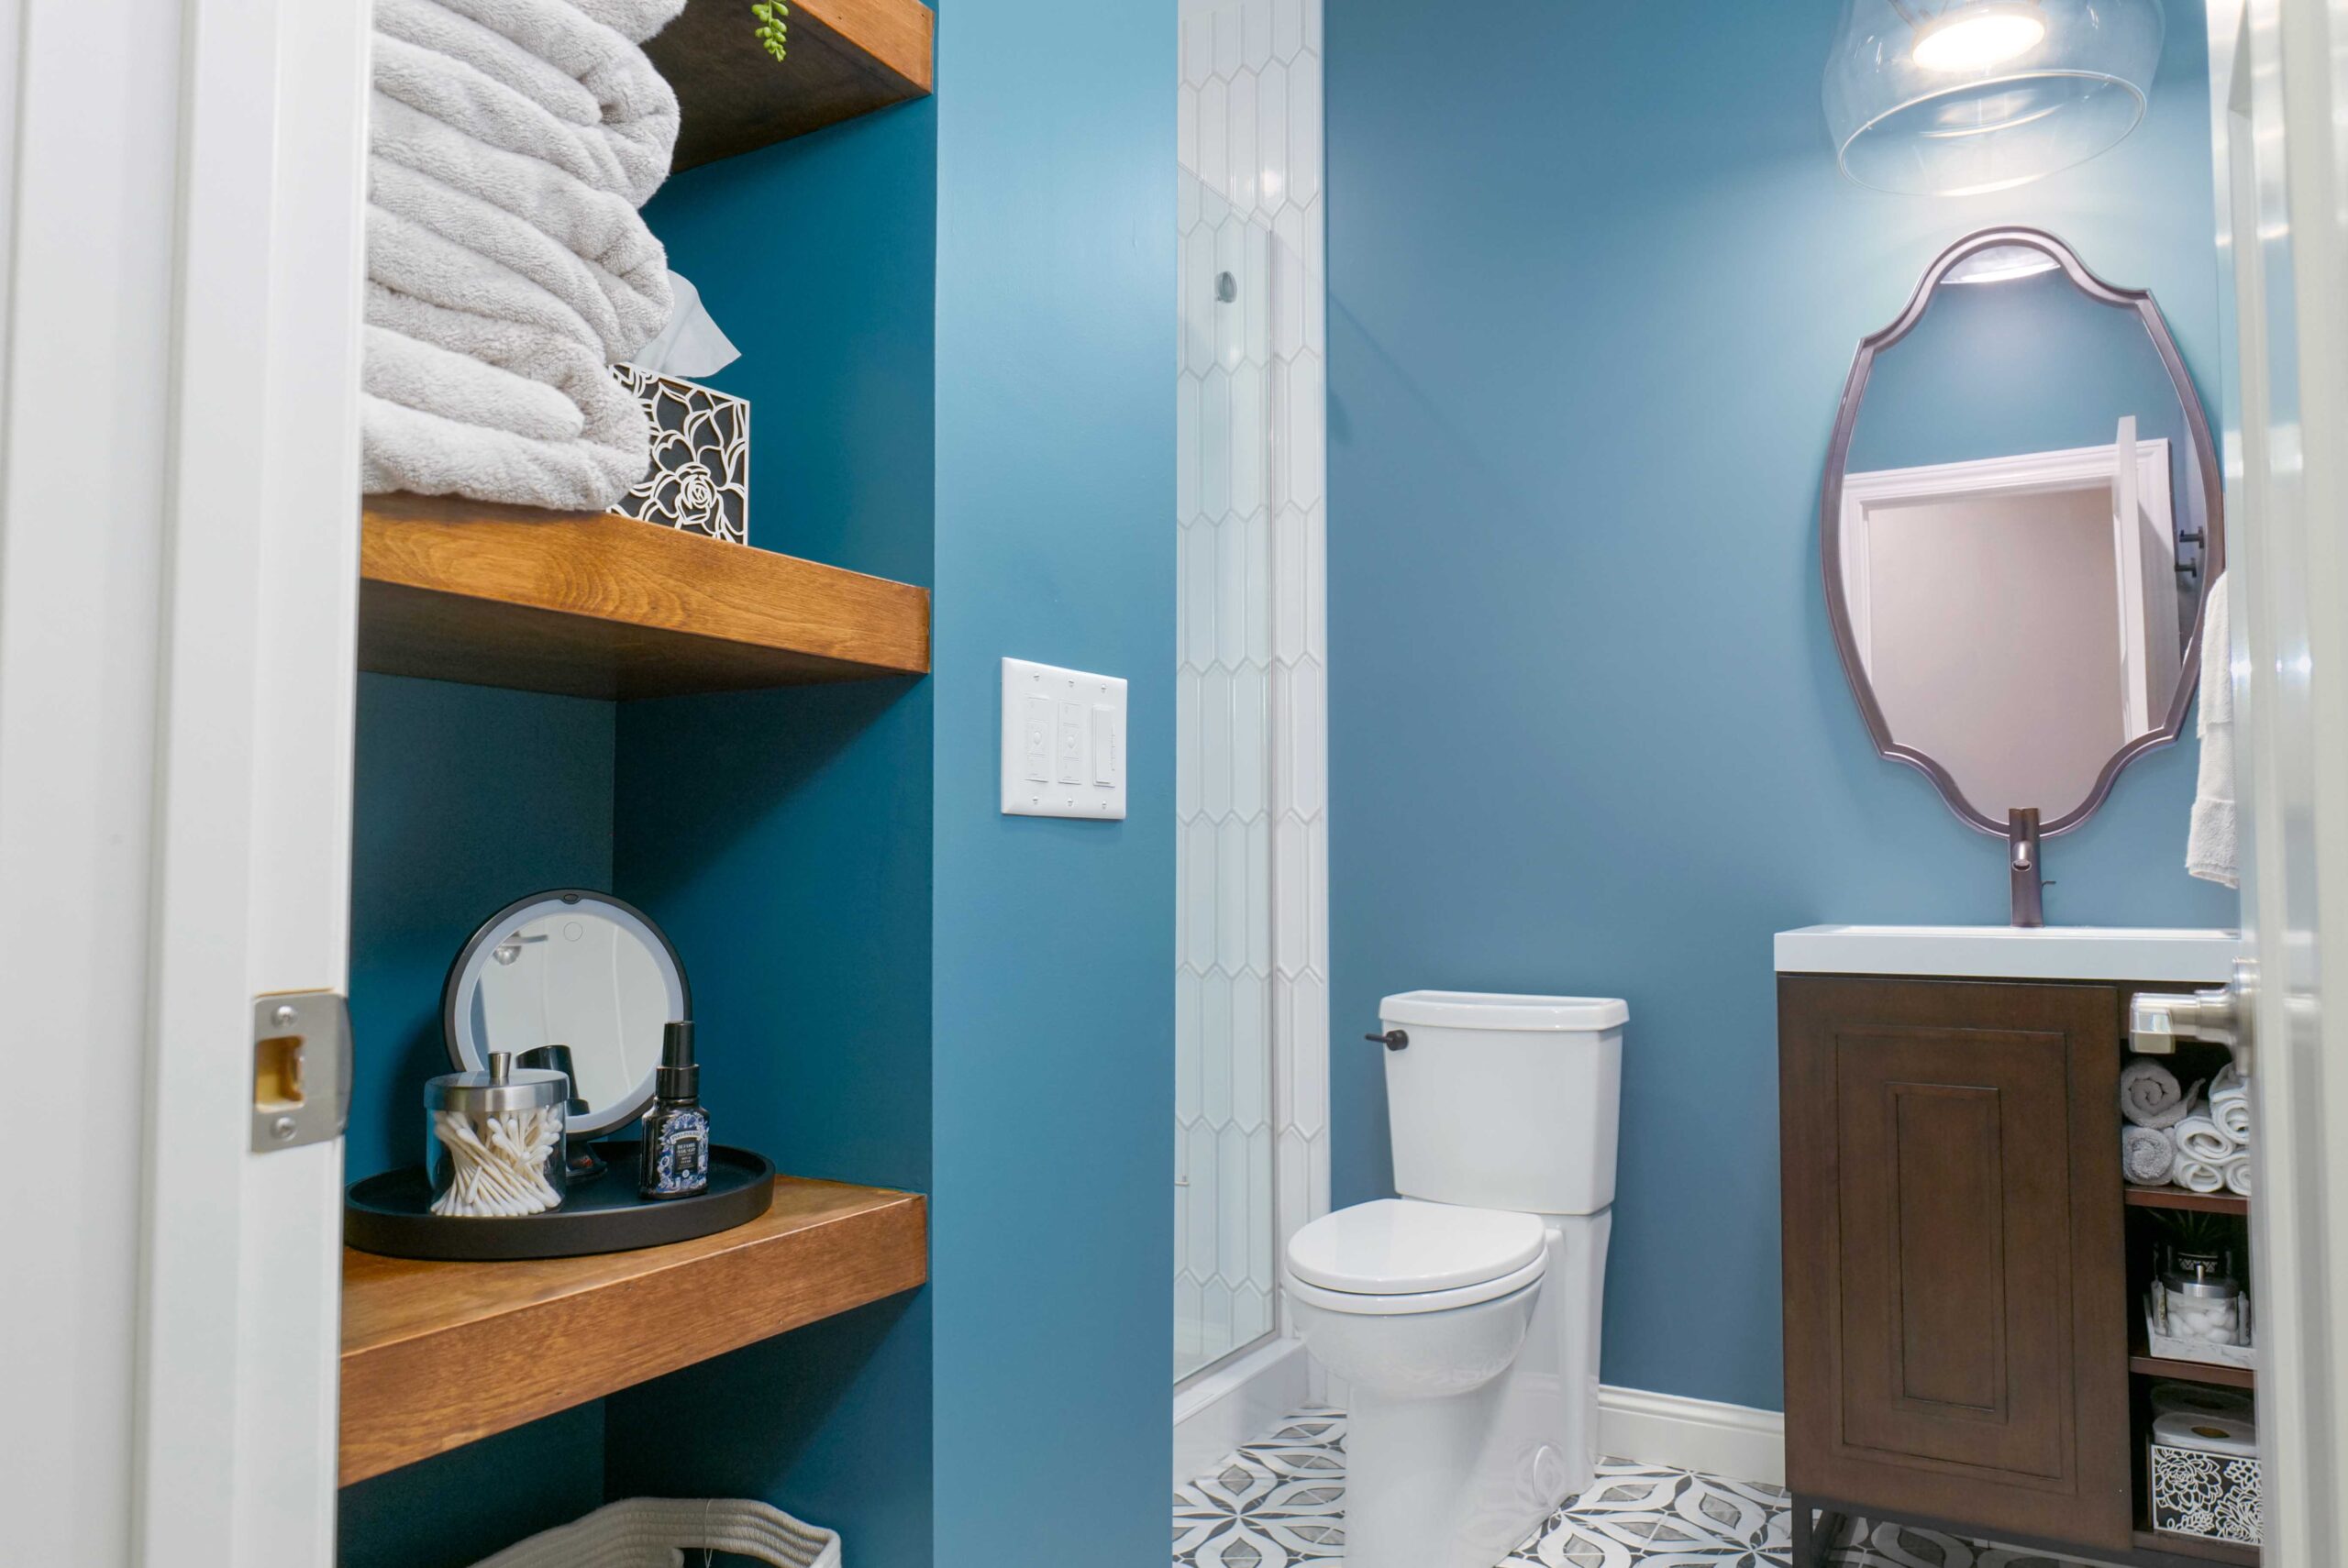 A bathroom with blue walls and wooden shelves, part of the Orchard Lake remodel.